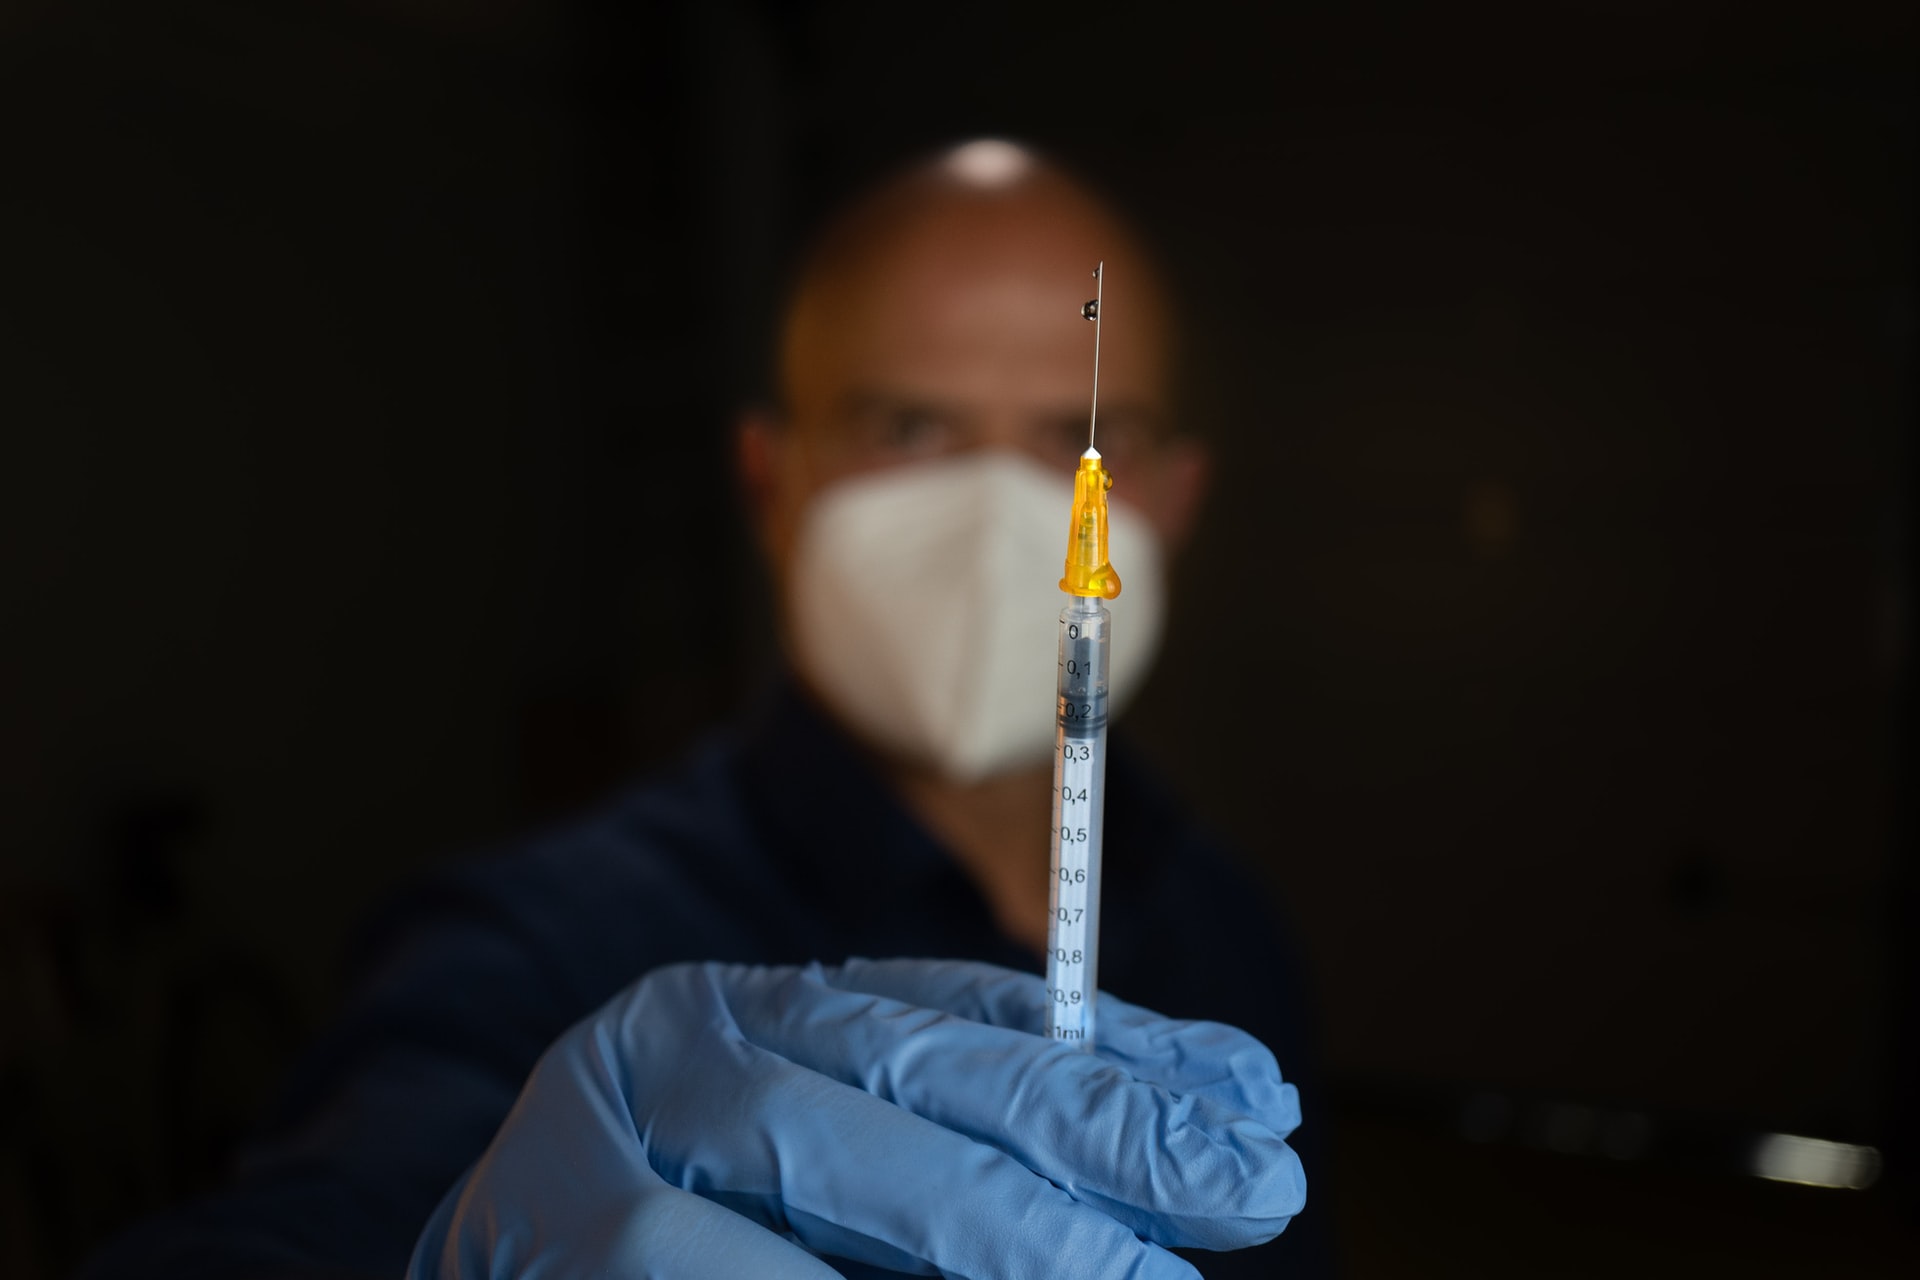 Israel’s scientists create a method to treat HIV with a single injection and vaccination